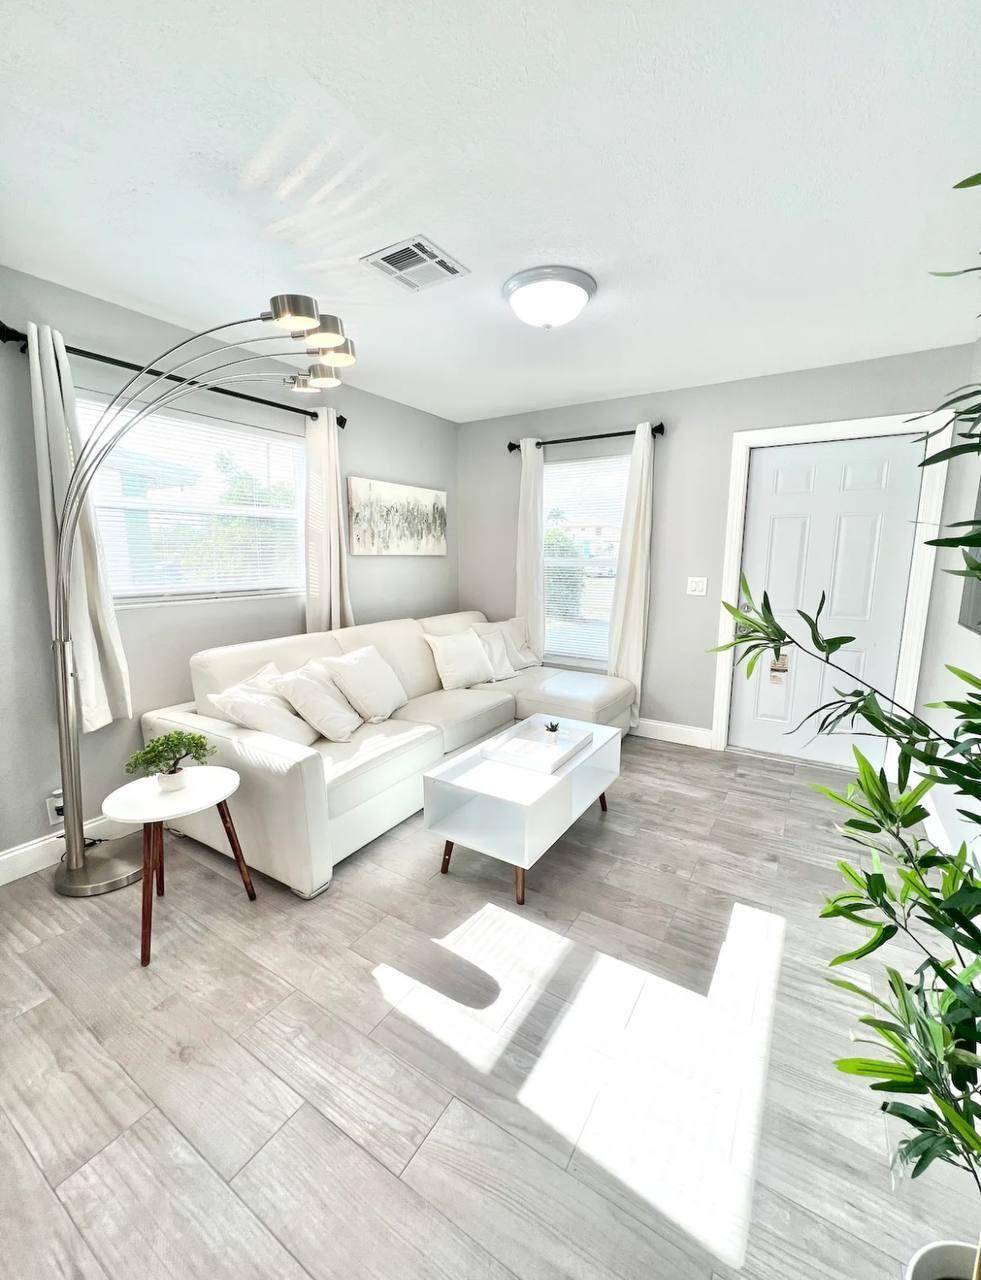 FULLY FURNISHED MODERN 4 BEDROOMS 2 BATHS RENOVATED HOME IN THE HEART OF WEST PALM BEACH.